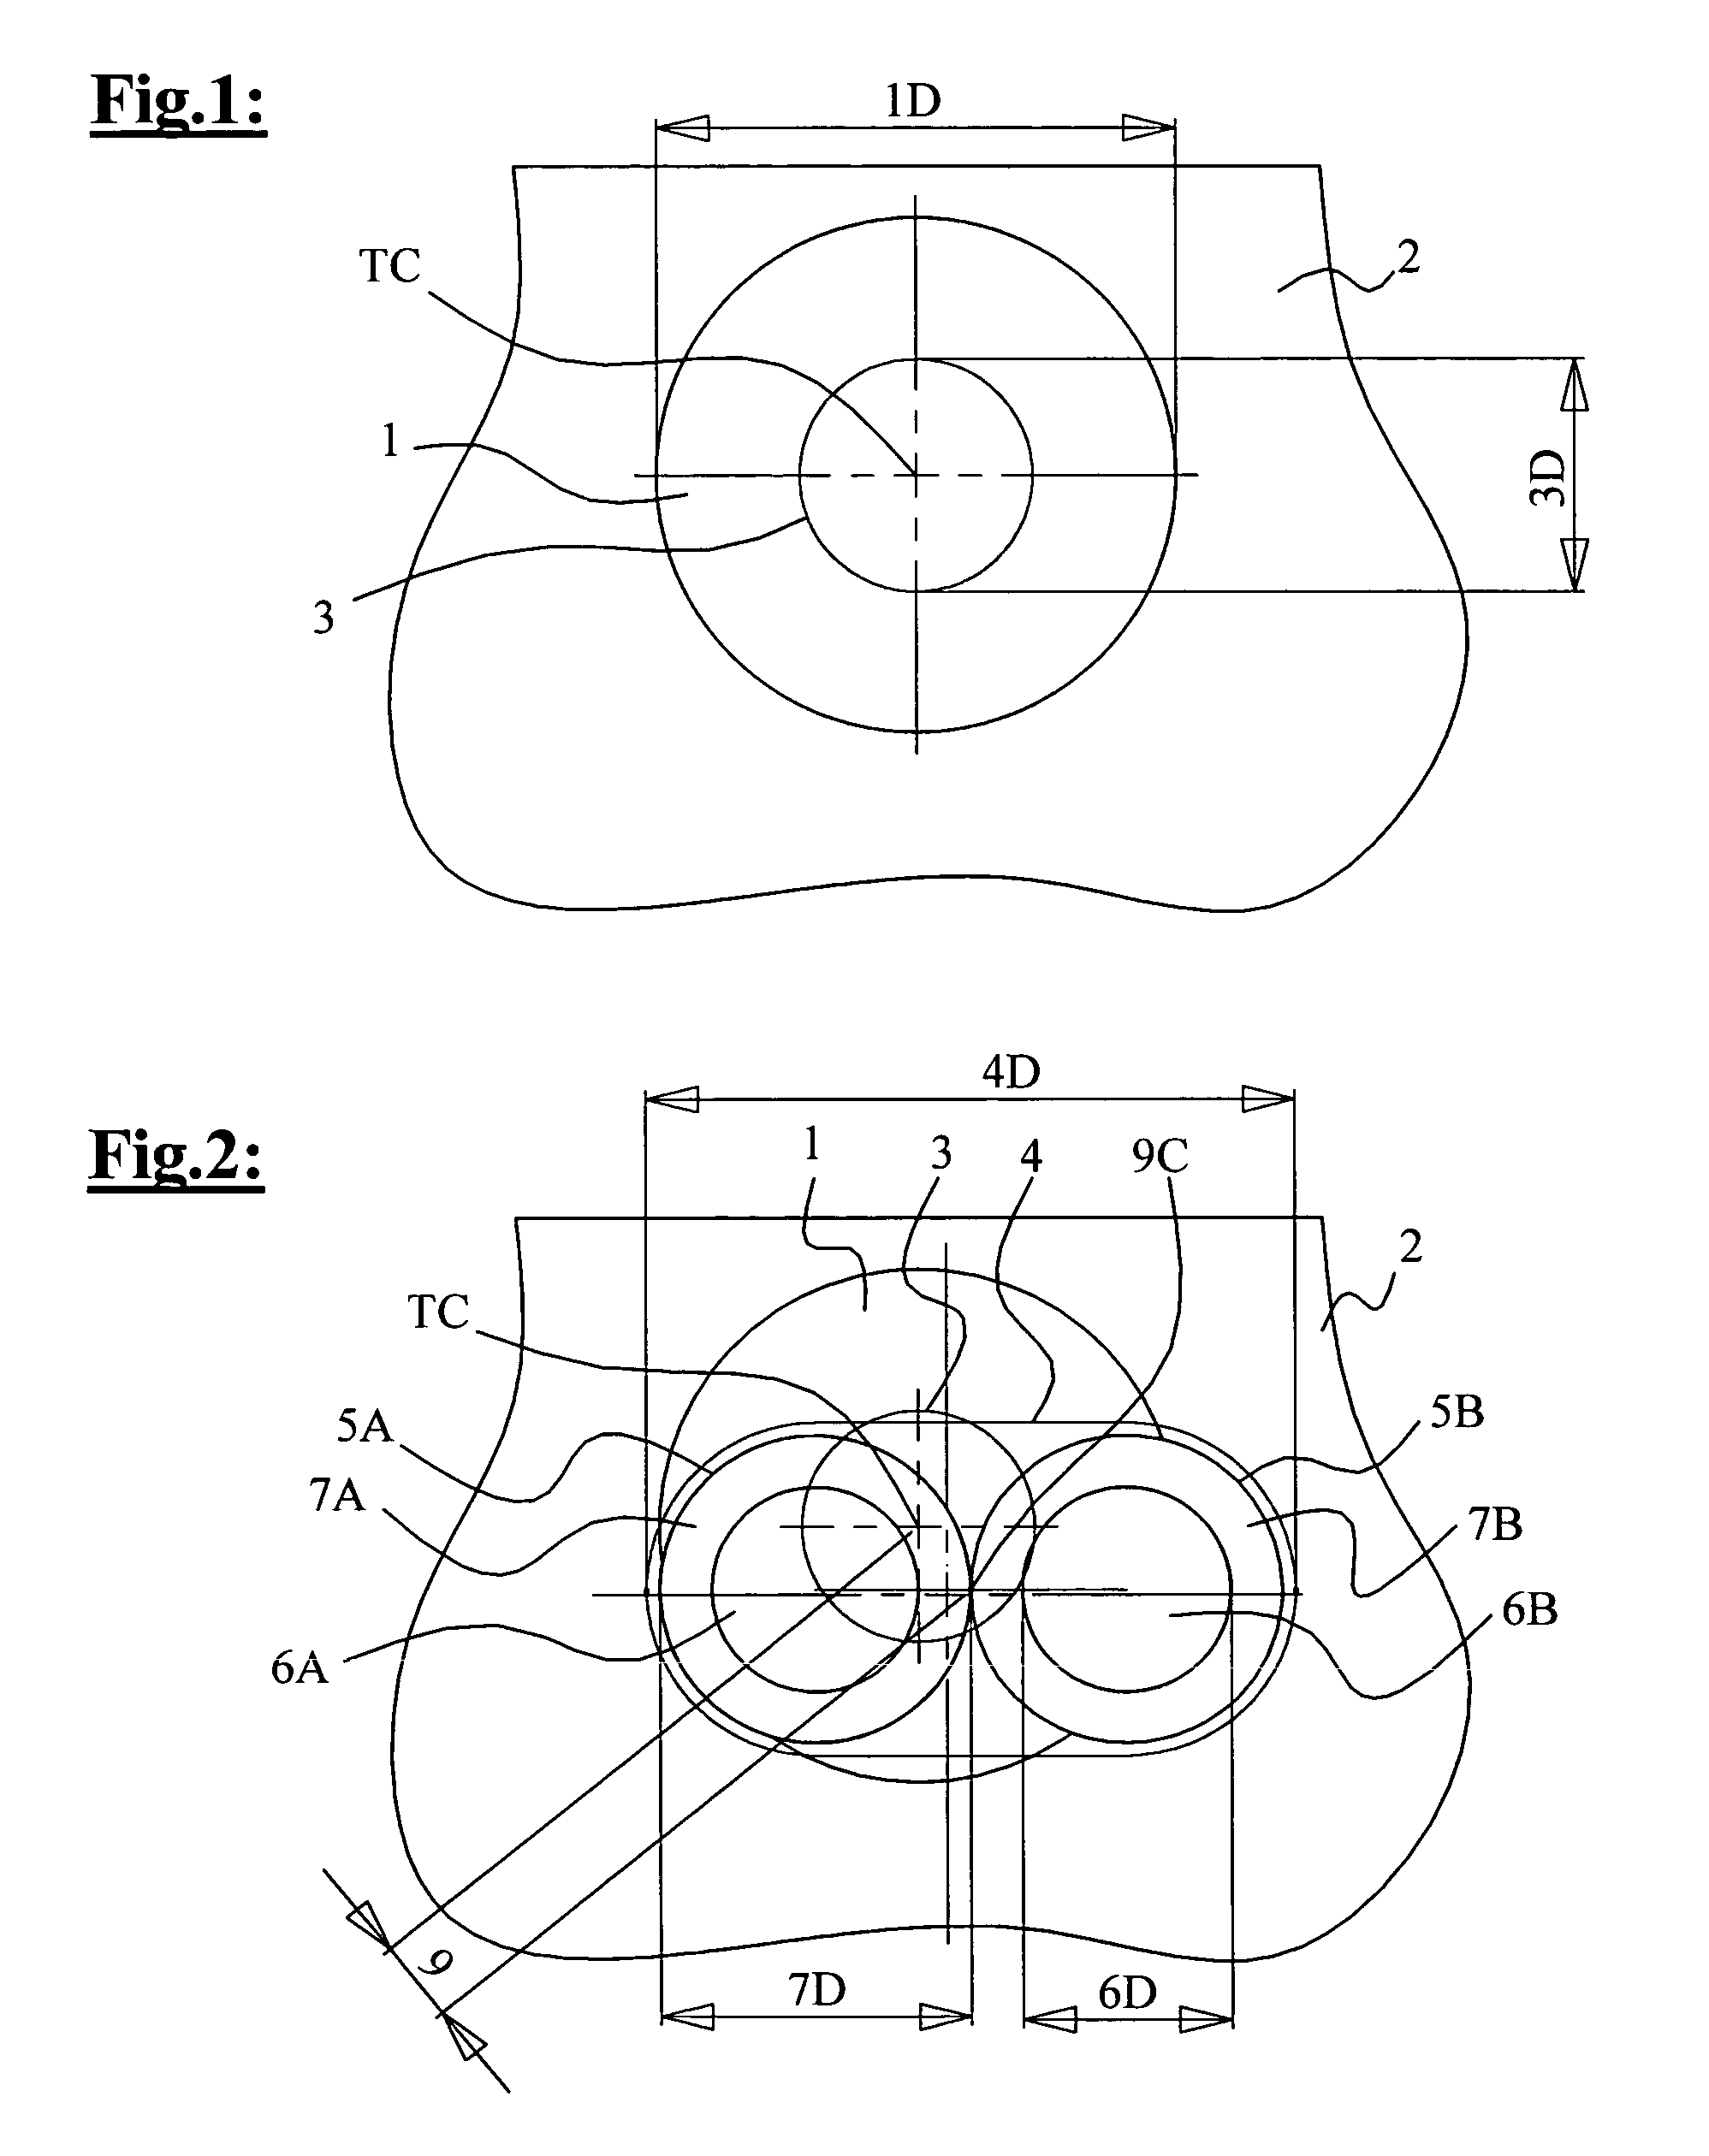 Bundled probe apparatus for multiple terminal contacting